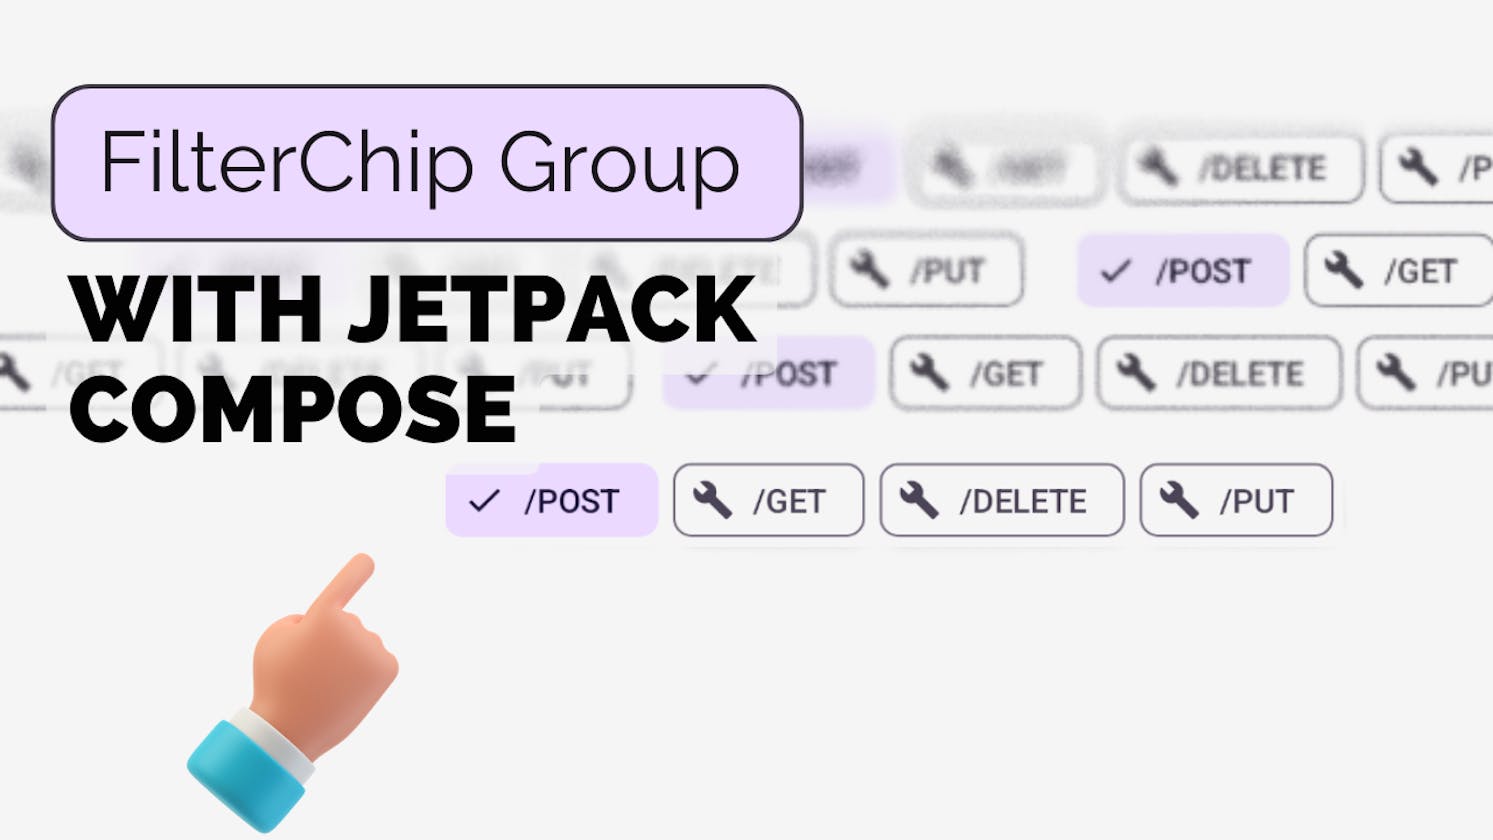 Custom FilterChip Group using Jetpack Compose in Android